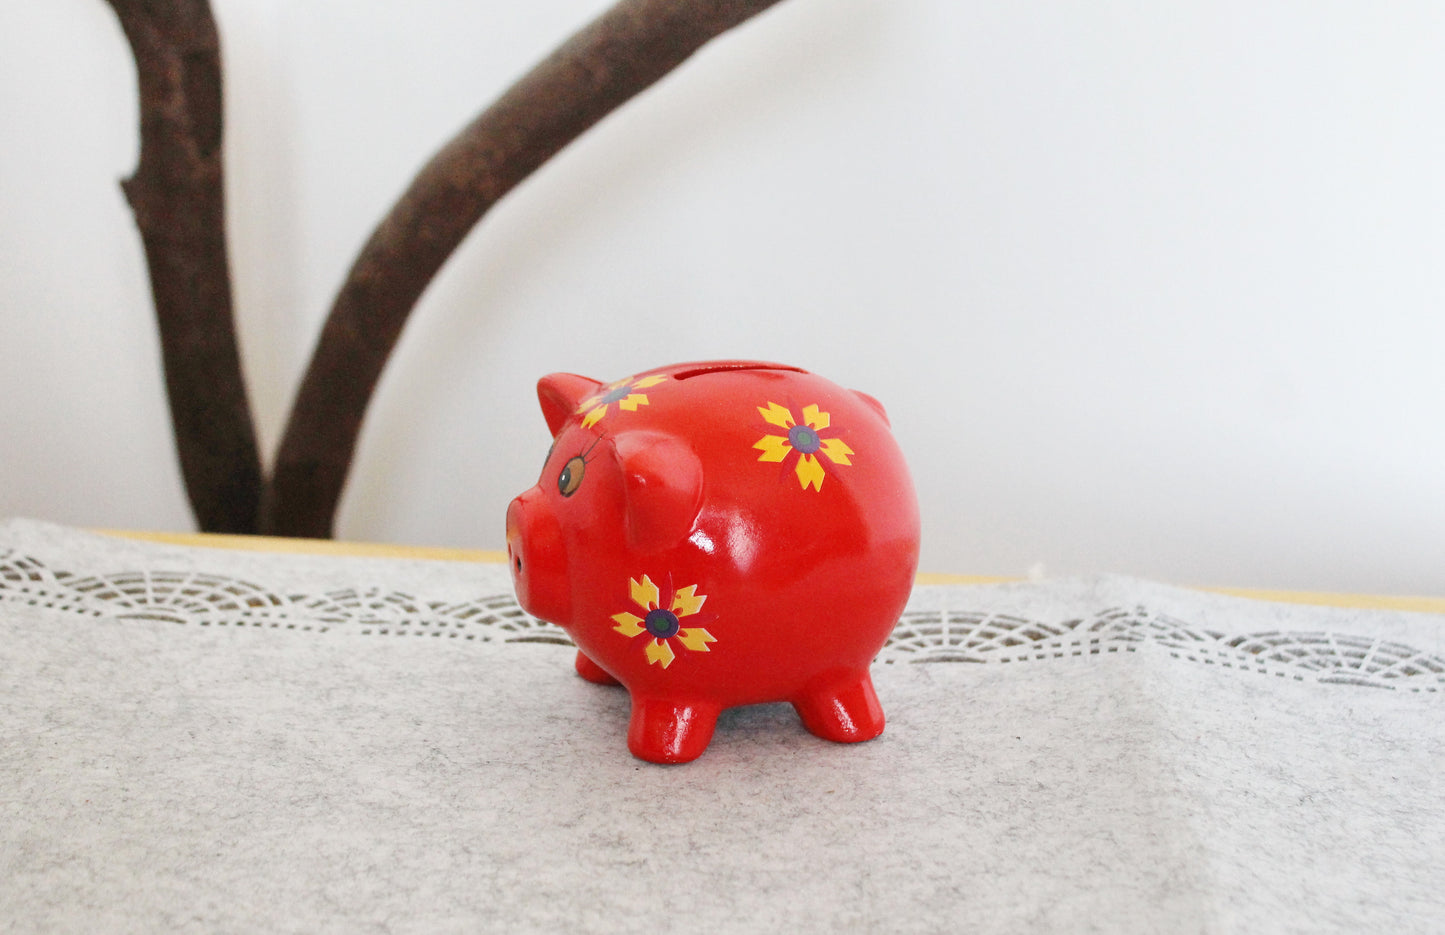 Porcelain red Piggy Bank 4 inches - Vintage Piggy Bank - Home decor - Made in Germany - 1990-2000s